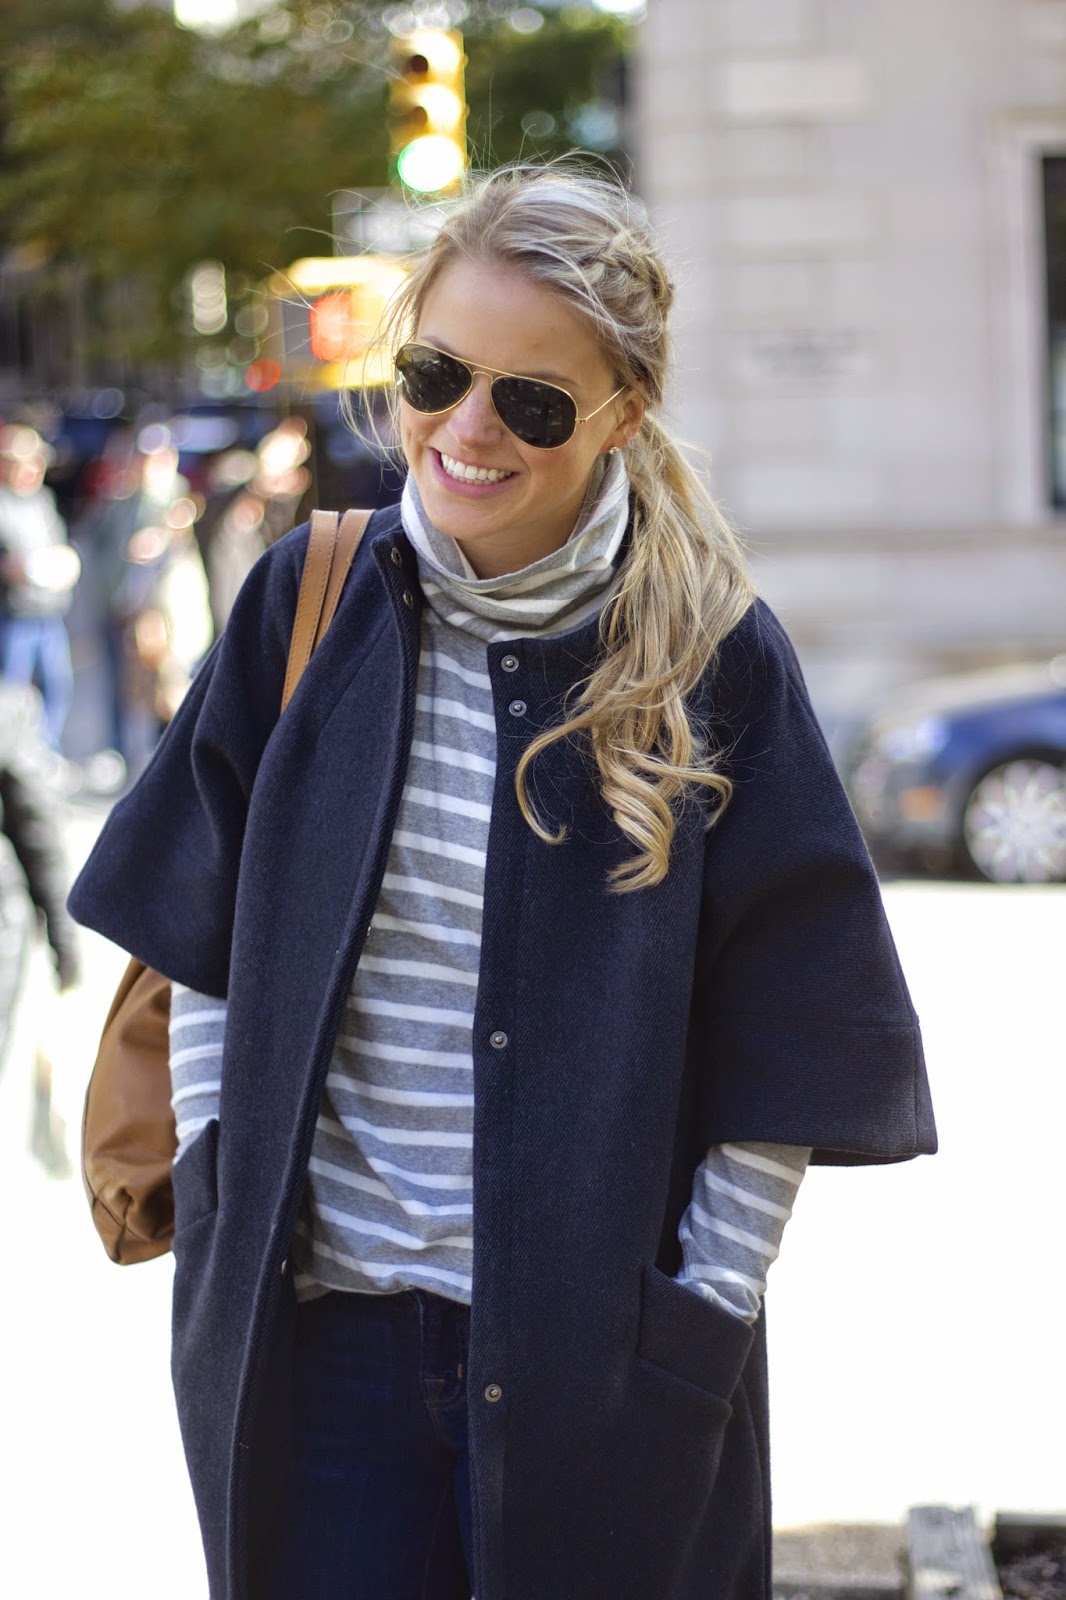 braids, stripes, turtleneck, winter coat, how to layer, ankle booties, nyc, hair extensions